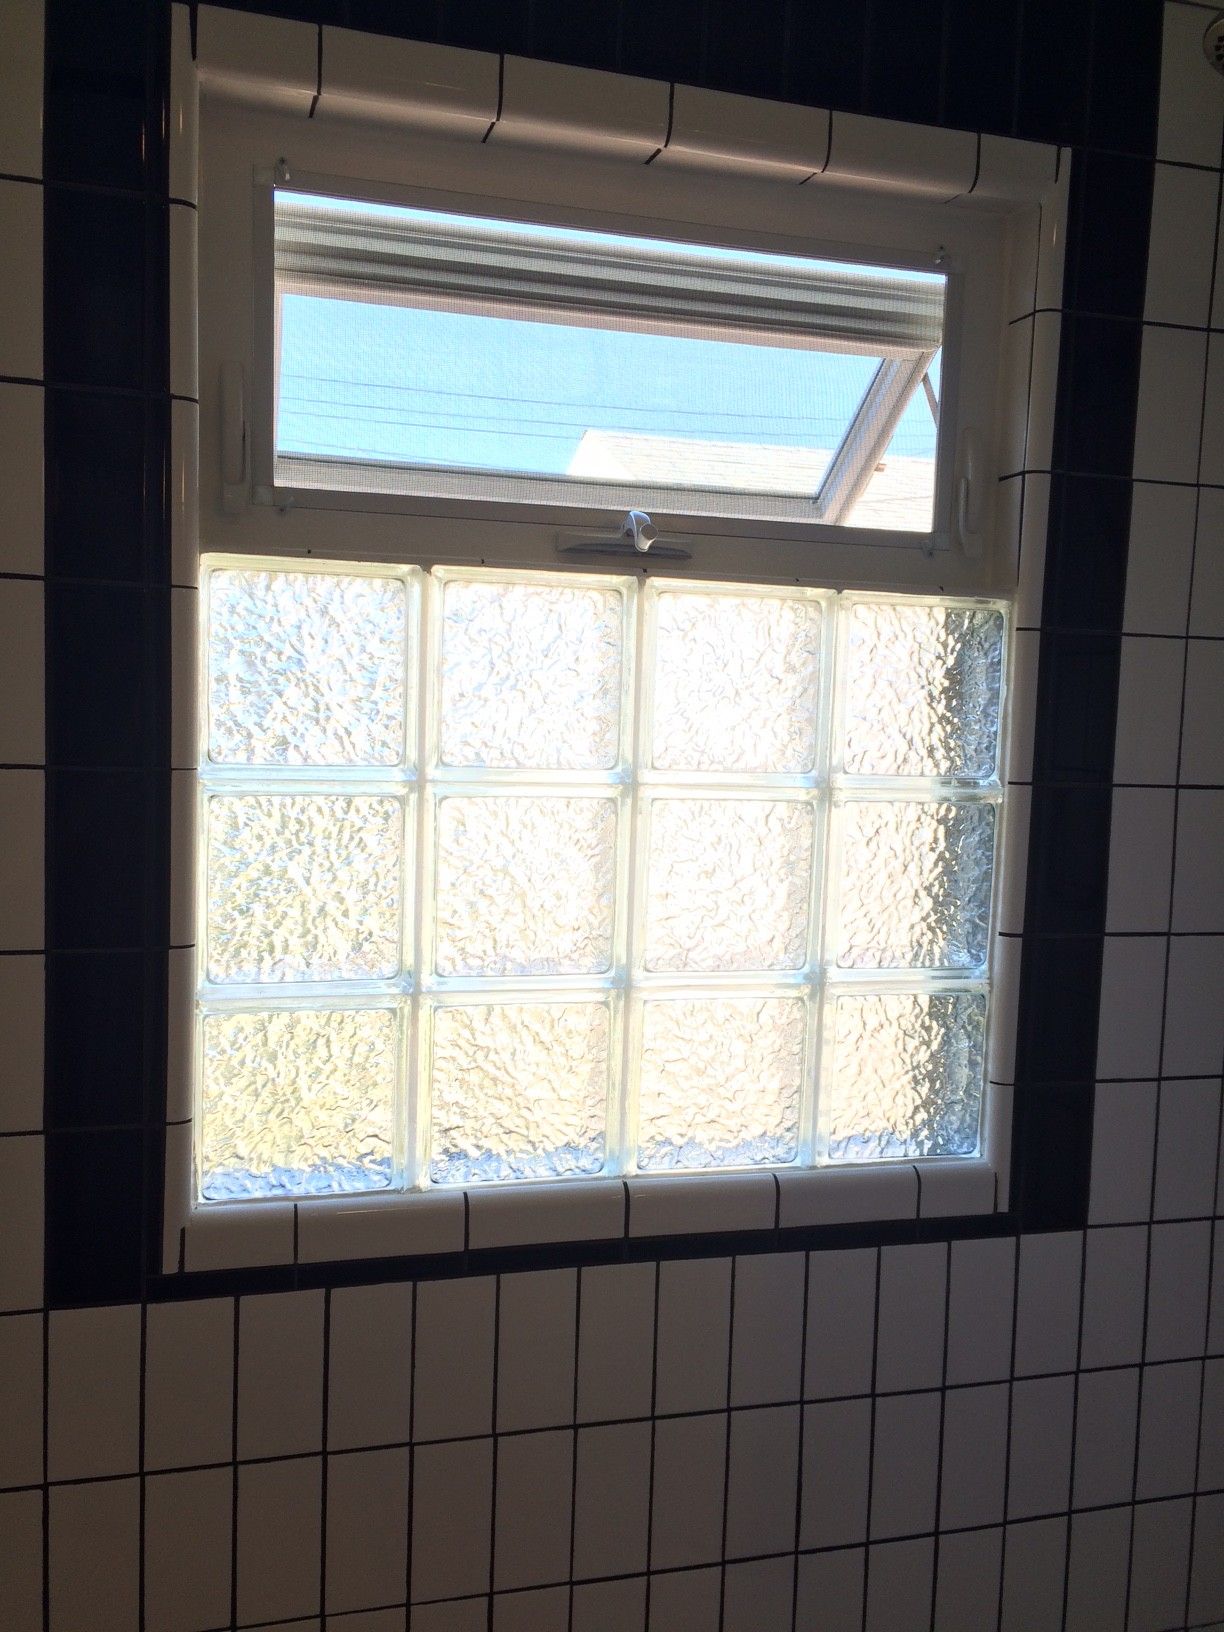 Black and white bathroom remodel. Glass block with awning window top ...